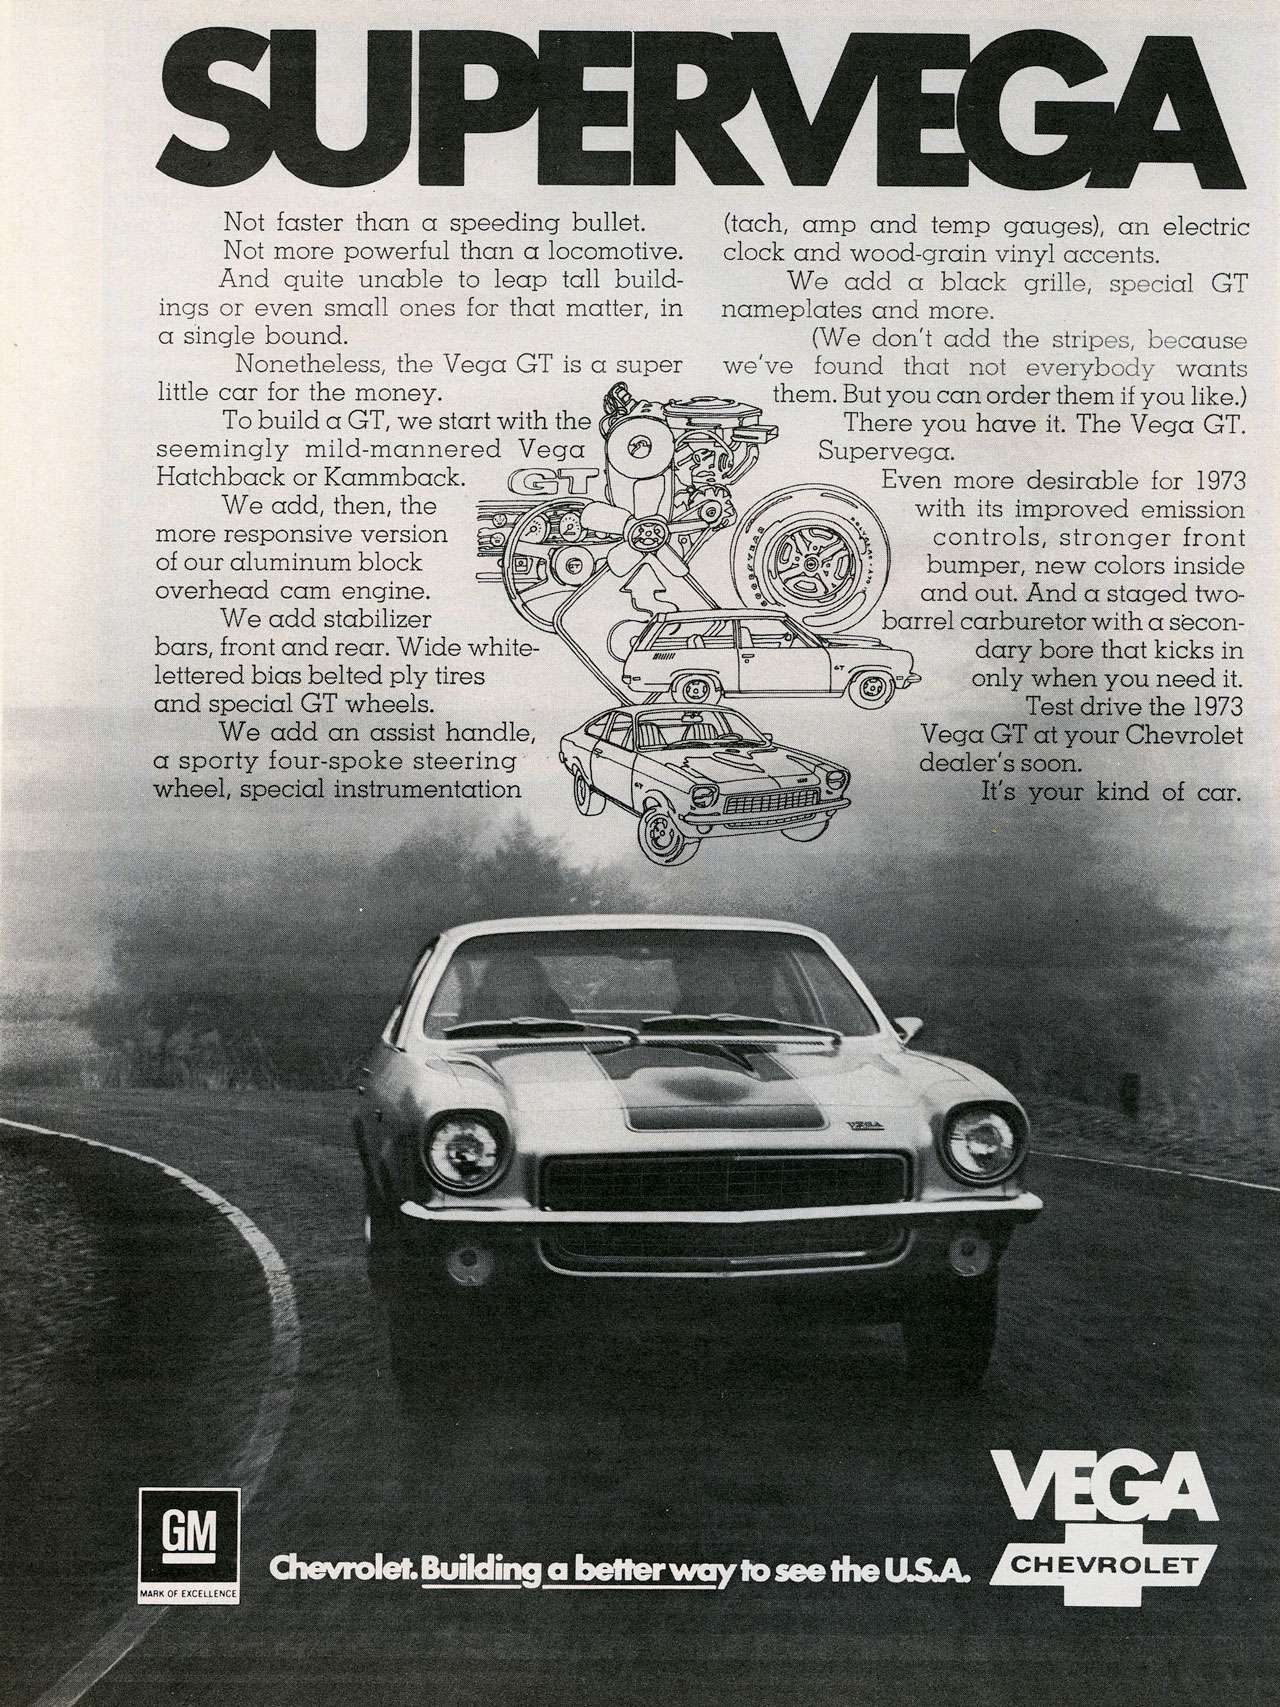 The 1973 Chevrolet Vega GT. Building a better way to see the USA. SUPERVEGA Not faster than a speeding bullet. Not more powerful than a locomotive. And quite unable to leap tall build-ings or even small ones for that matter, in a single bound. Nonetheless, the Vega GT is a super little car for the money. To build a GT, we start with the seemingly mild-mannered Vega Hatchback or Kammback. We add, then, the more responsive version of our aluminum block overhead cam engine. We add stabilizer bars, front and rear. Wide white-lettered bias belted ply tires and special GT wheels. We add an assist handle, a sporty four-spoke steering wheel, special instrumentation (tach, amp and temp gauges), an electric clock and wood-grain vinyl accents. We add a black grille, special GT nameplates and more. (We don't add the stripes, because we've found that not everybody wants them. But you can order them if you like.) There you have it. The Vega GT. Supervega. Even more desirable for 1973 with its improved emission controls, stronger front bumper, new colors inside and out. And a staged two-barrel carburetor with a secondary bore that kicks in only when you need it. Test drive the 1973 Vega GT at your Chevrolet dealer's soon. It's your kind of car.